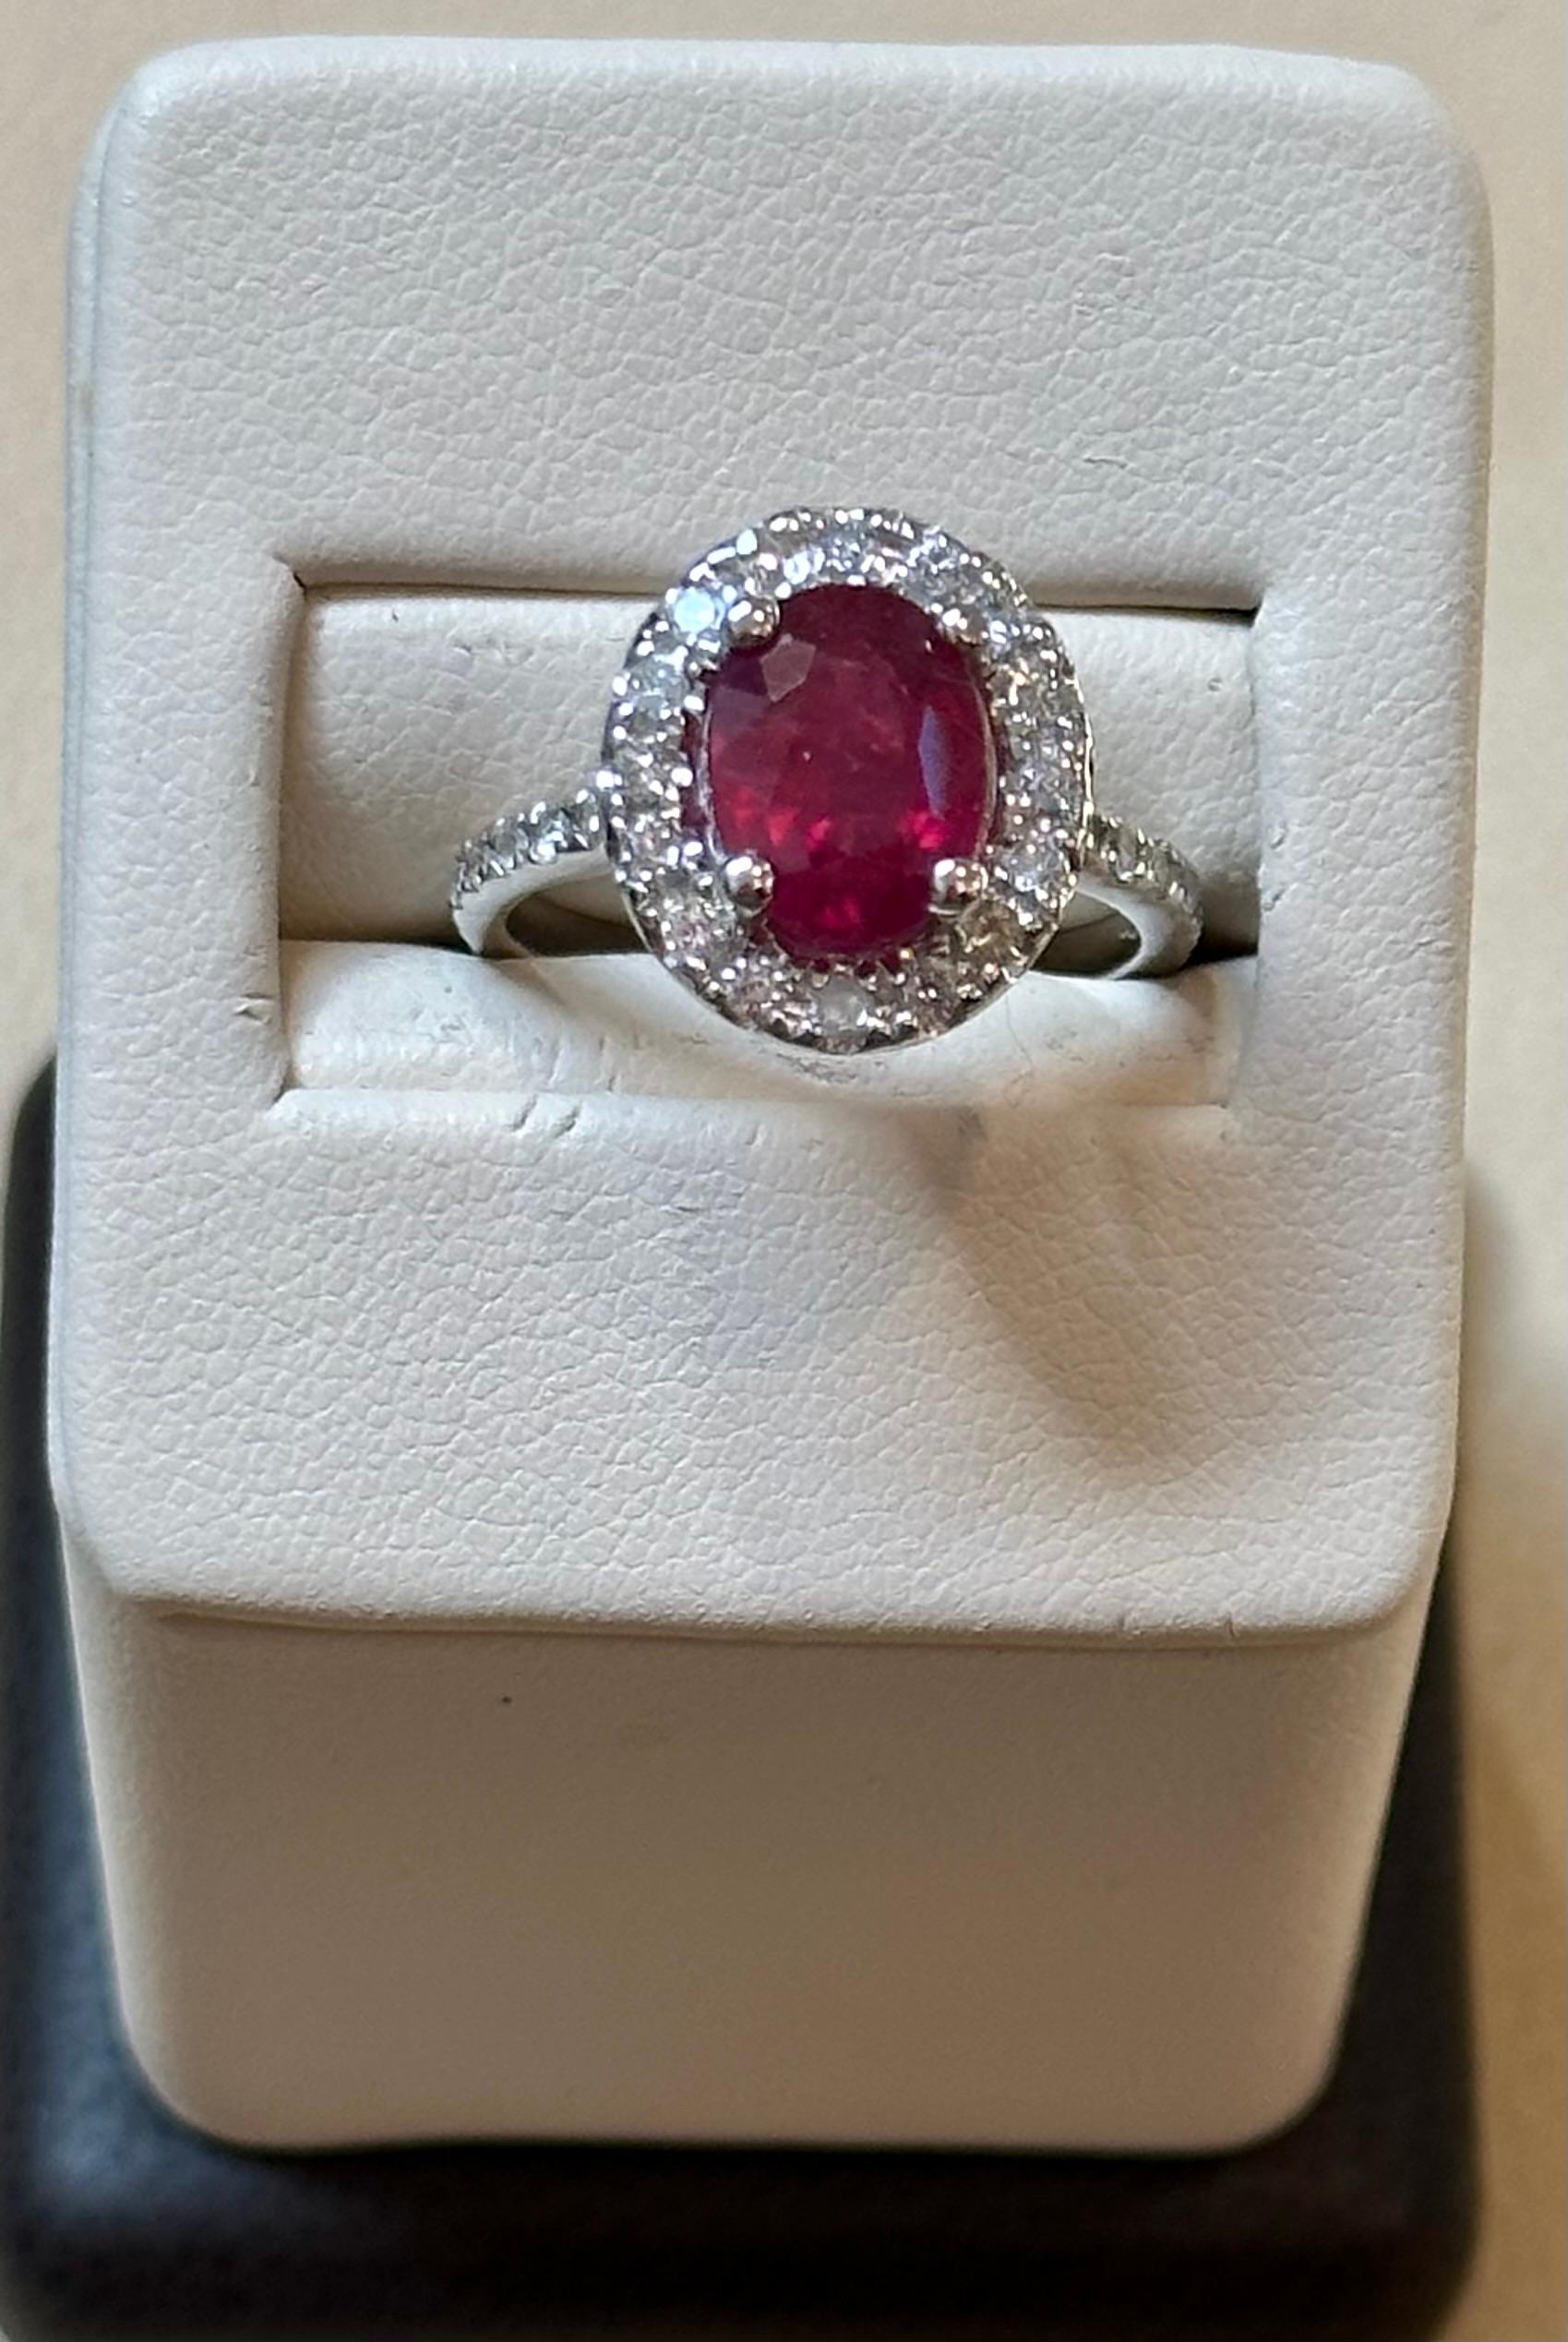 3 Carat Oval Treated Ruby & 1.25 ct Diamond Ring 14 Karat White Gold Size 6 For Sale 4